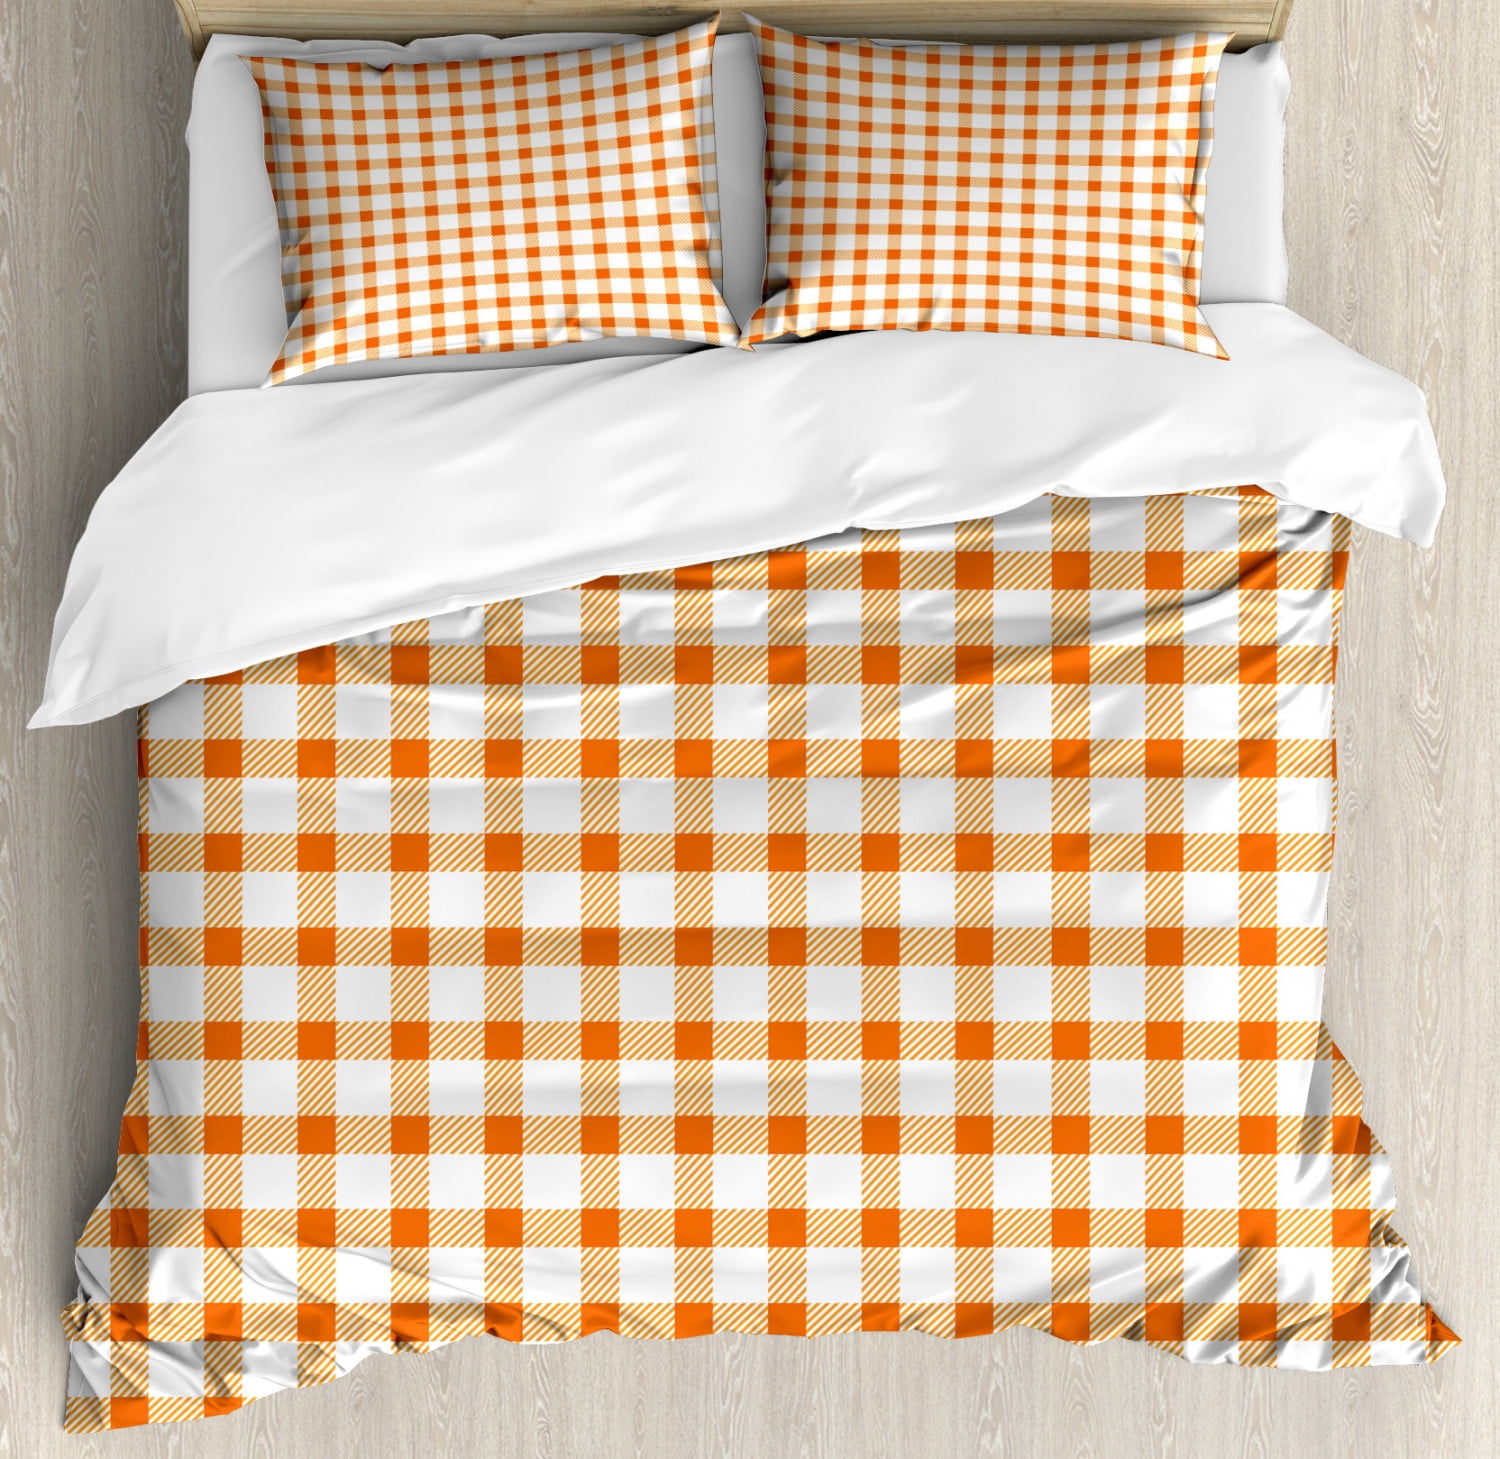 Orange And White Duvet Cover Set Queen, Gingham Bedding Twin